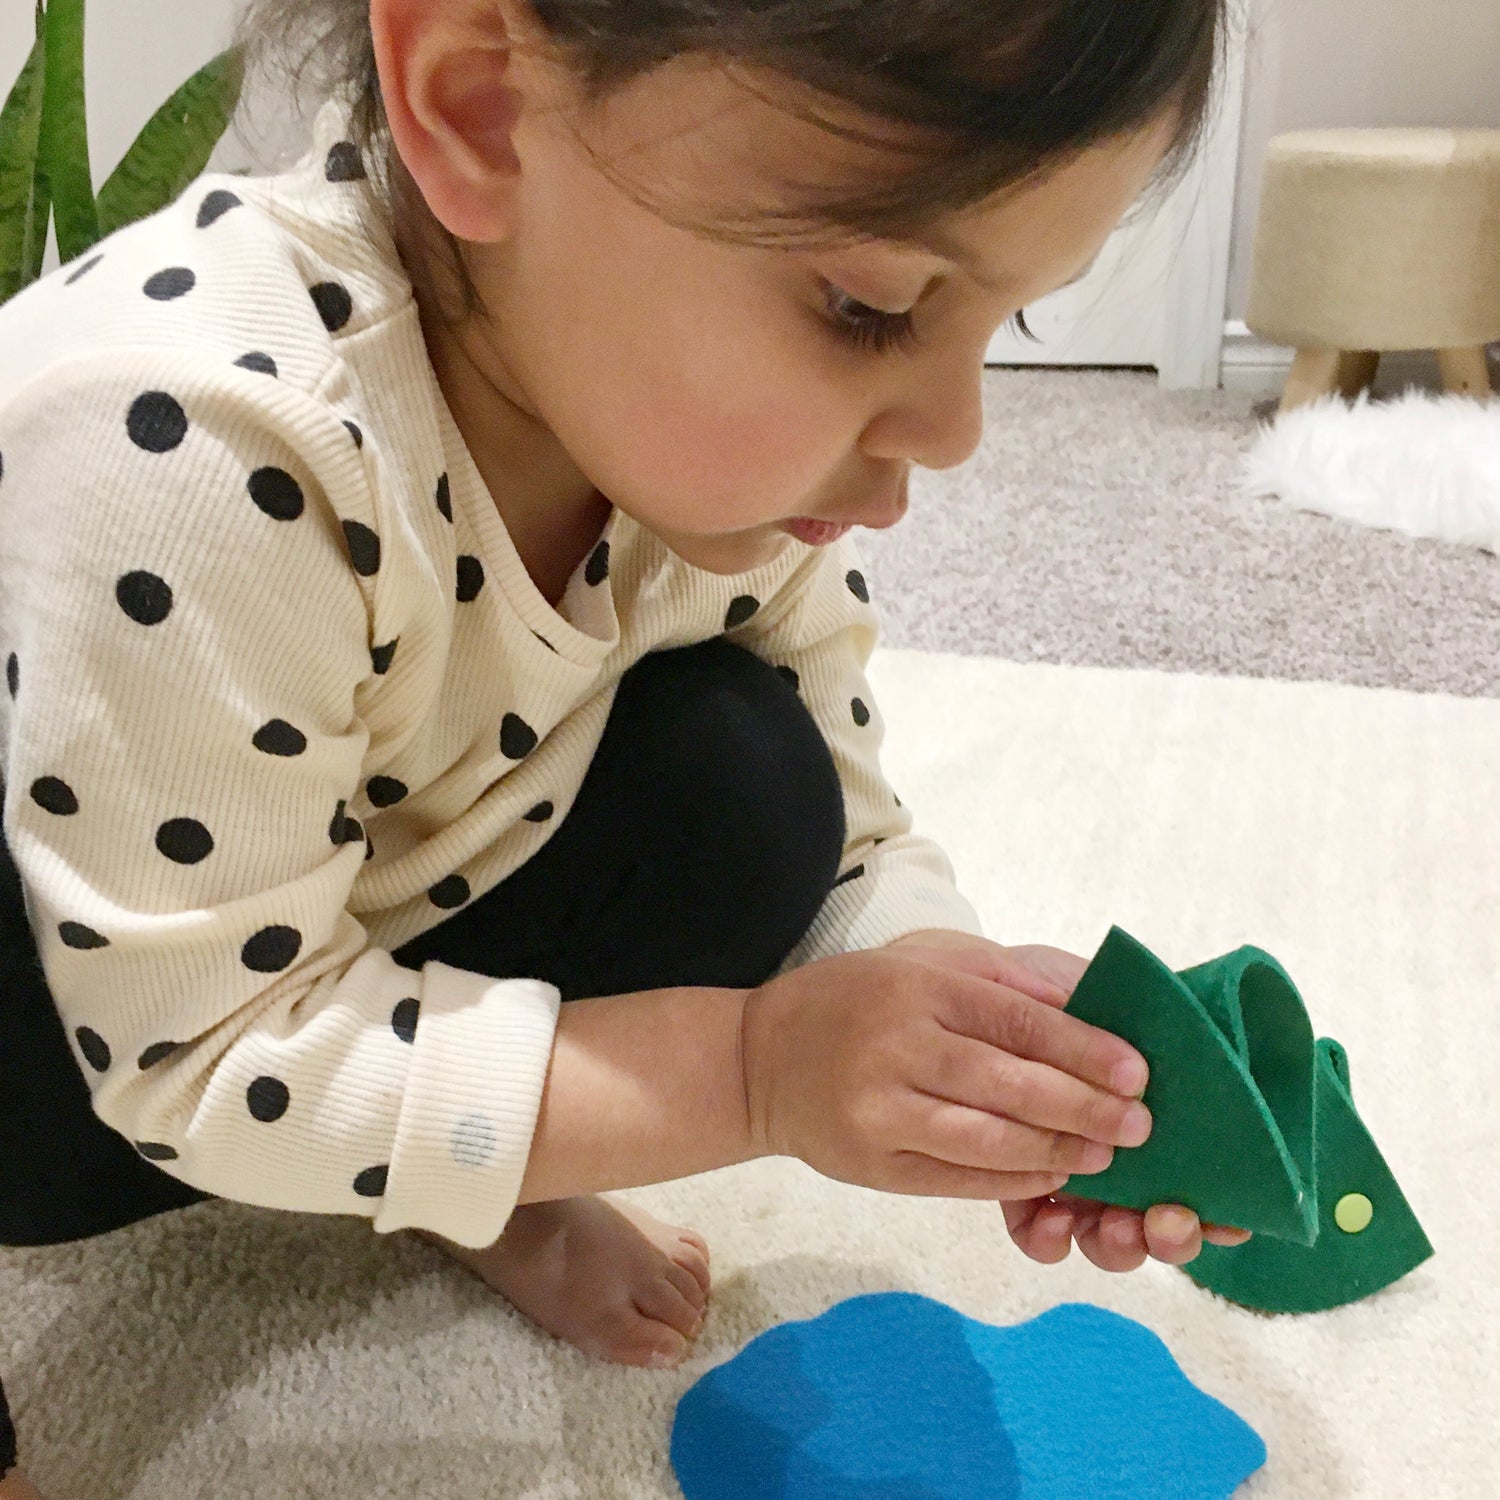 Girl practicing fine motor skills with felt toy that snaps